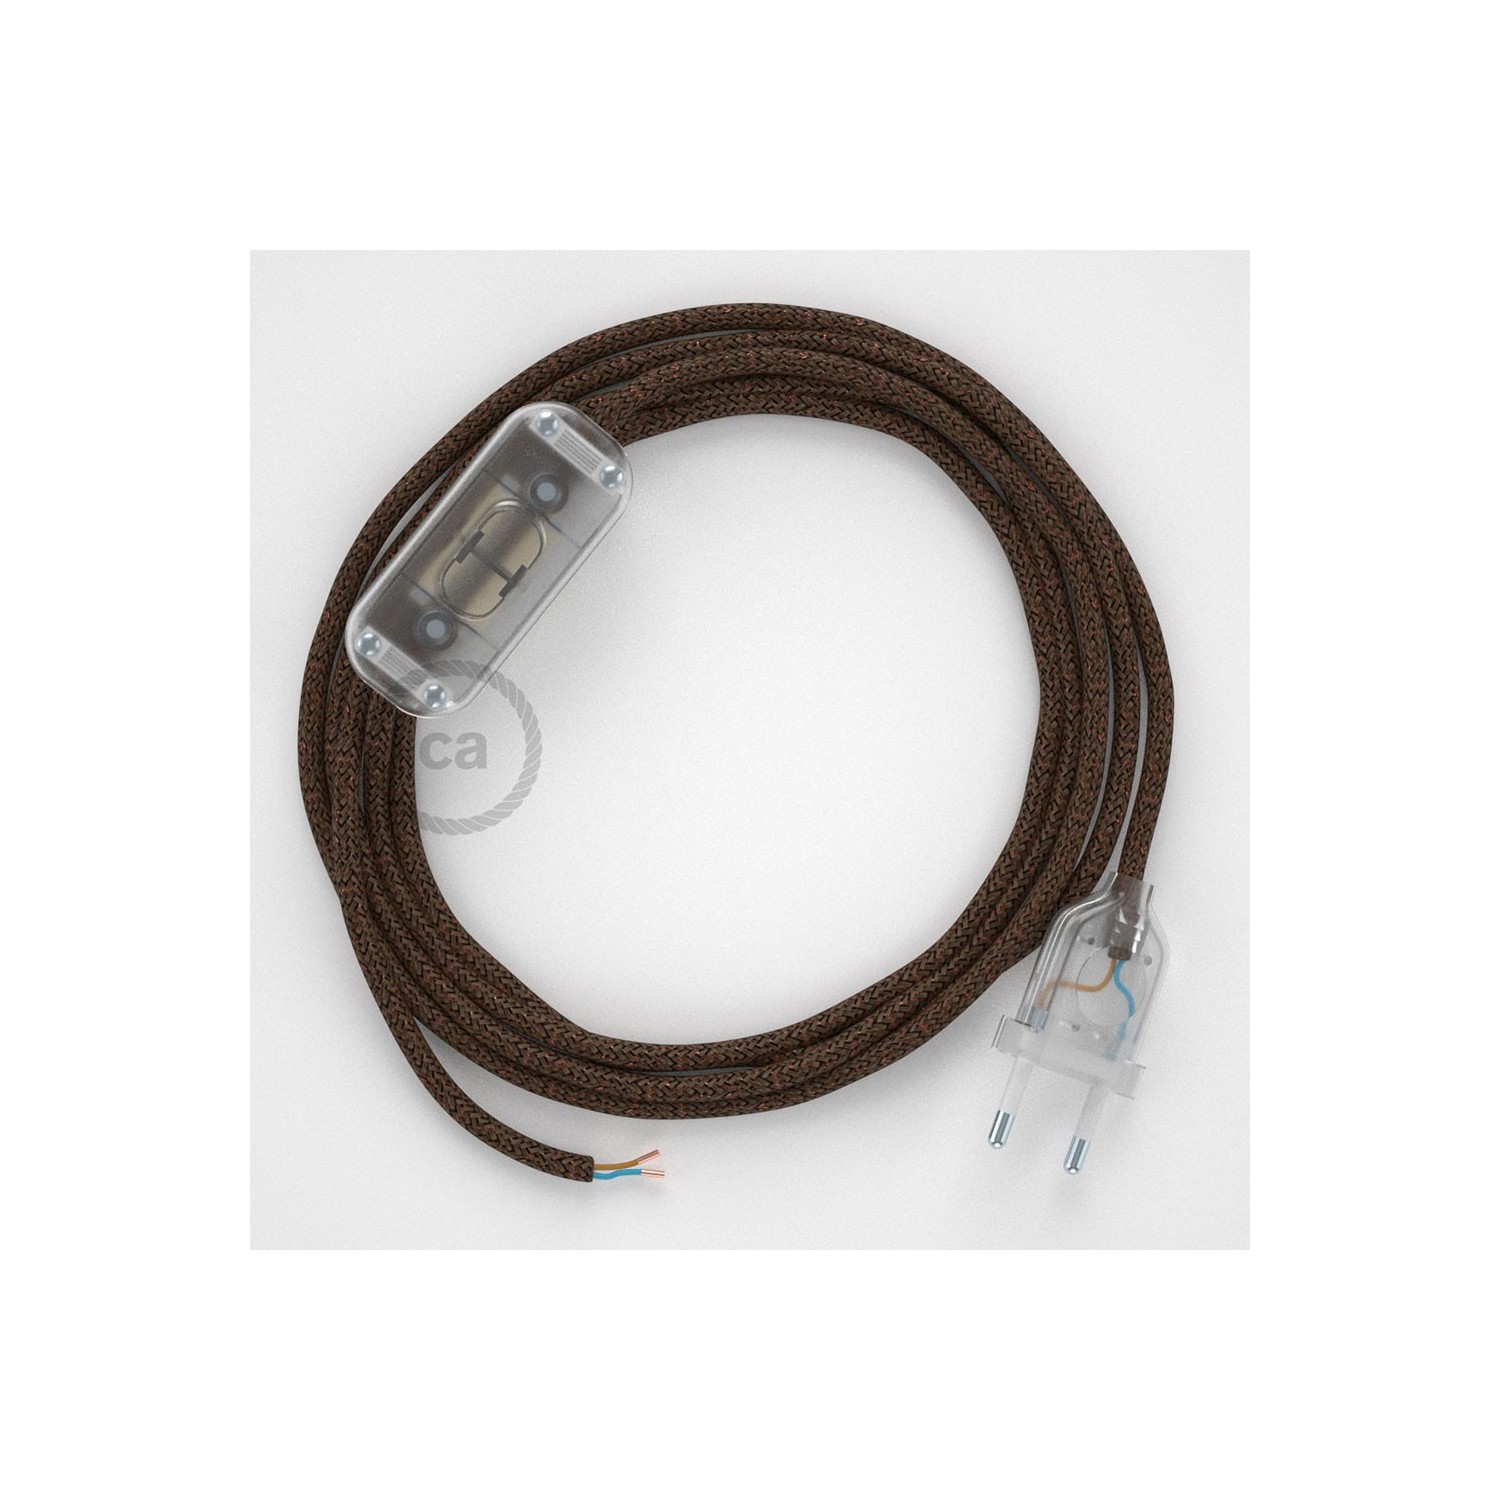 Lamp wiring, RL13 Sparkly Brown Rayon 1,80 m. Choose the colour of the switch and plug.